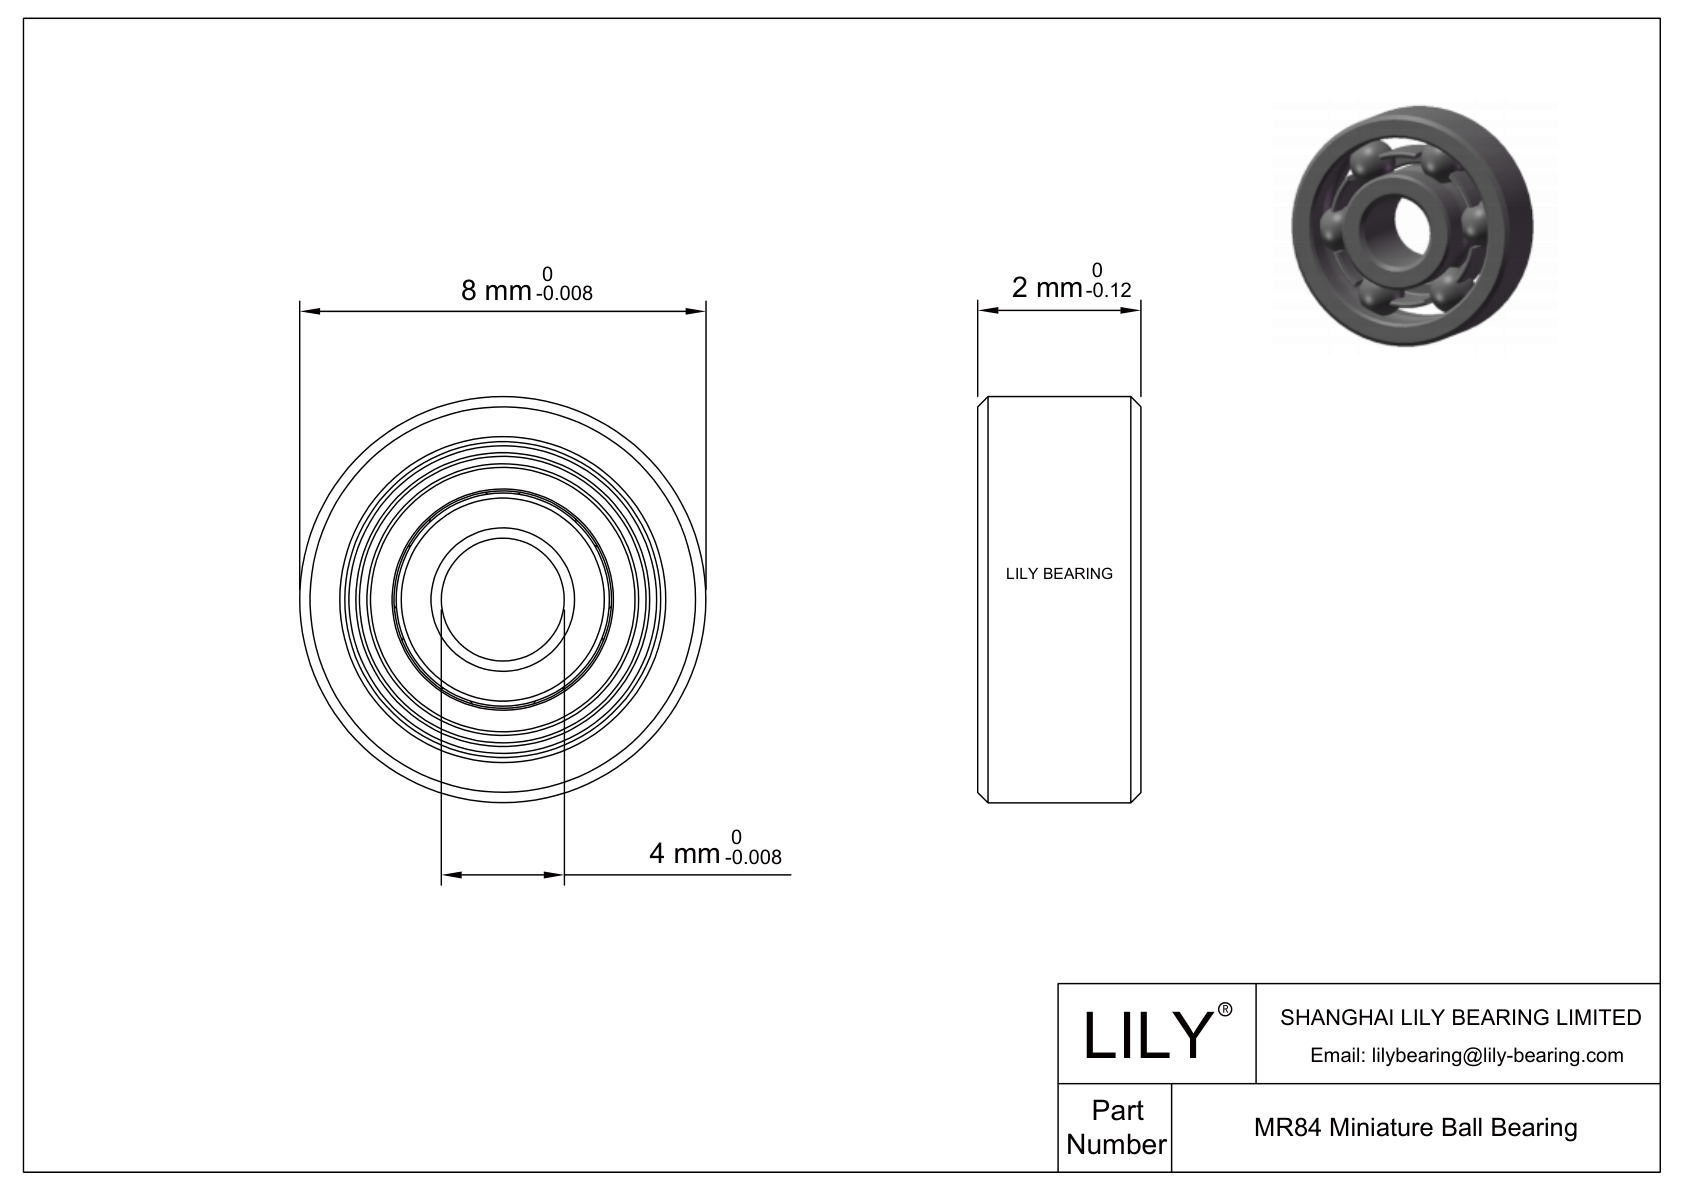 LILY-PUTMR8415-26 Outsourcing Polyurethane bearings cad drawing